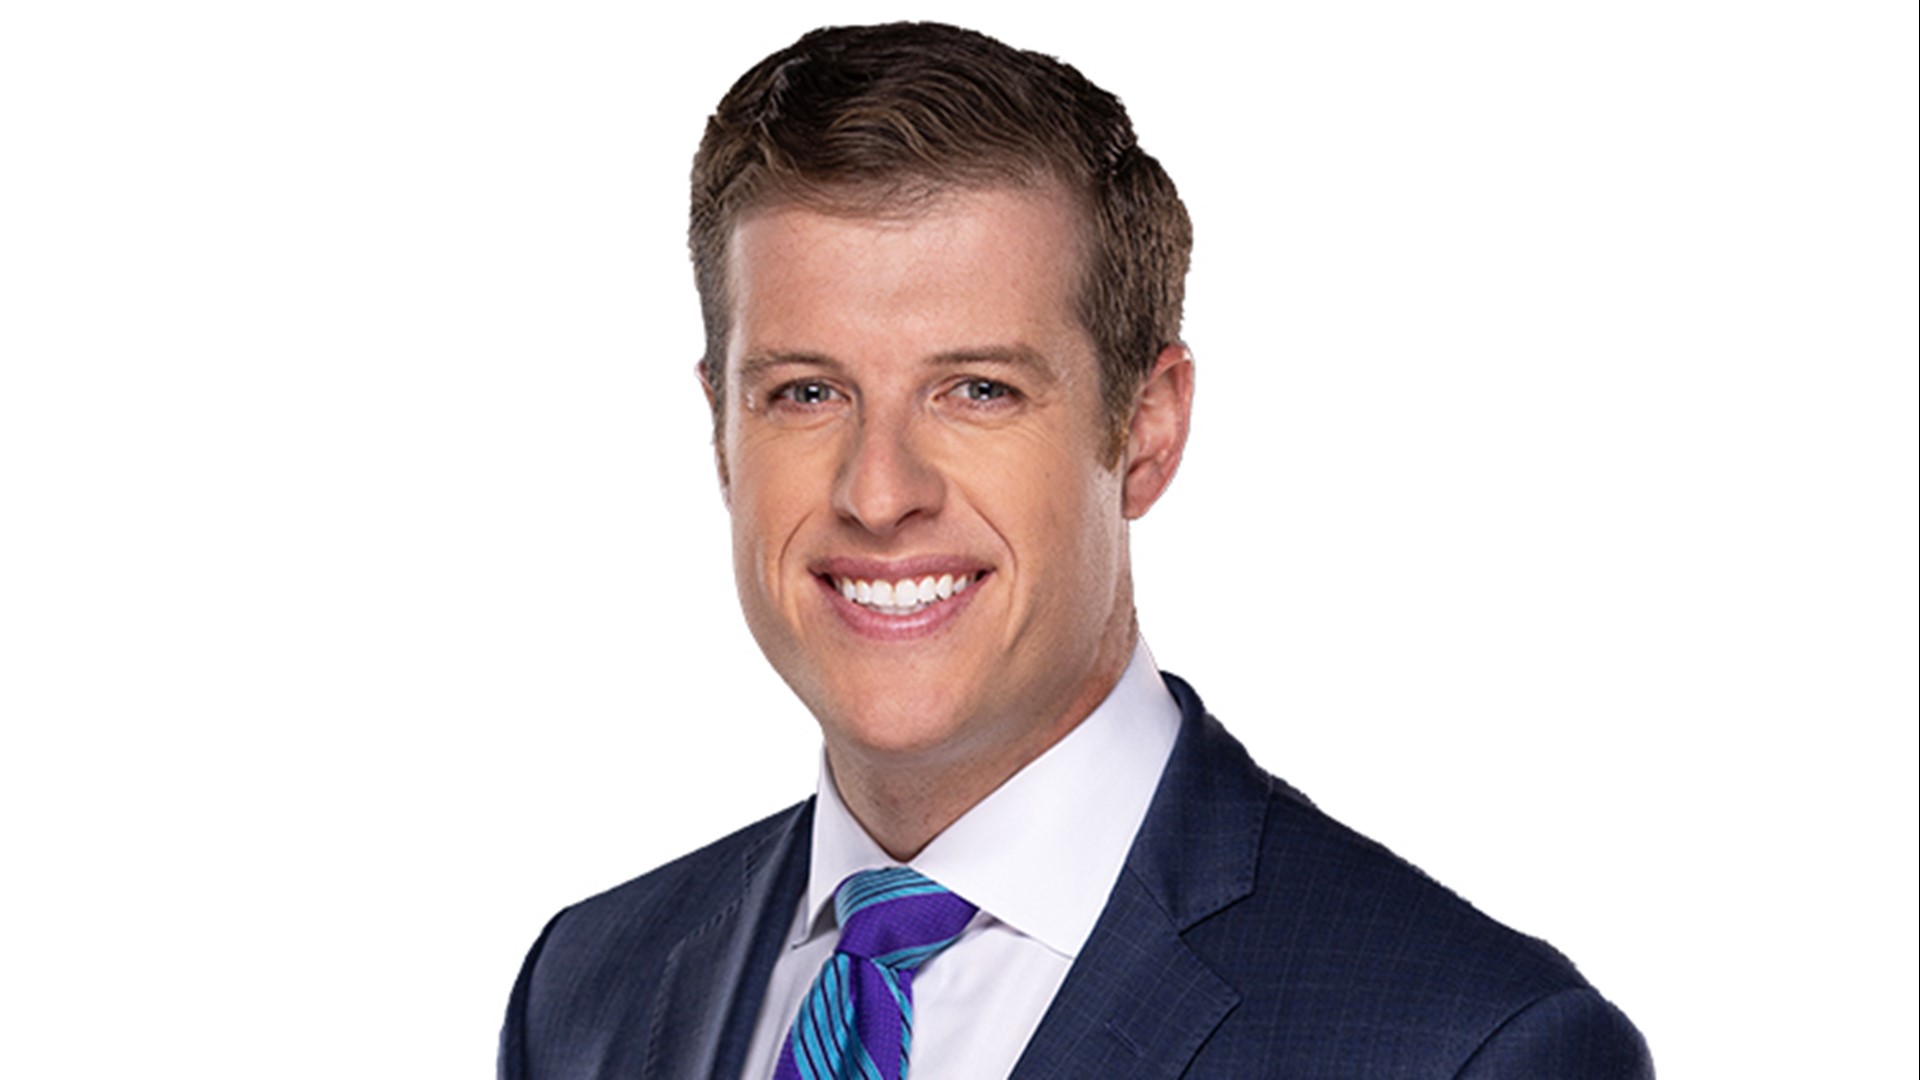 Get to know 13News Now Evening Anchor Dan Kennedy